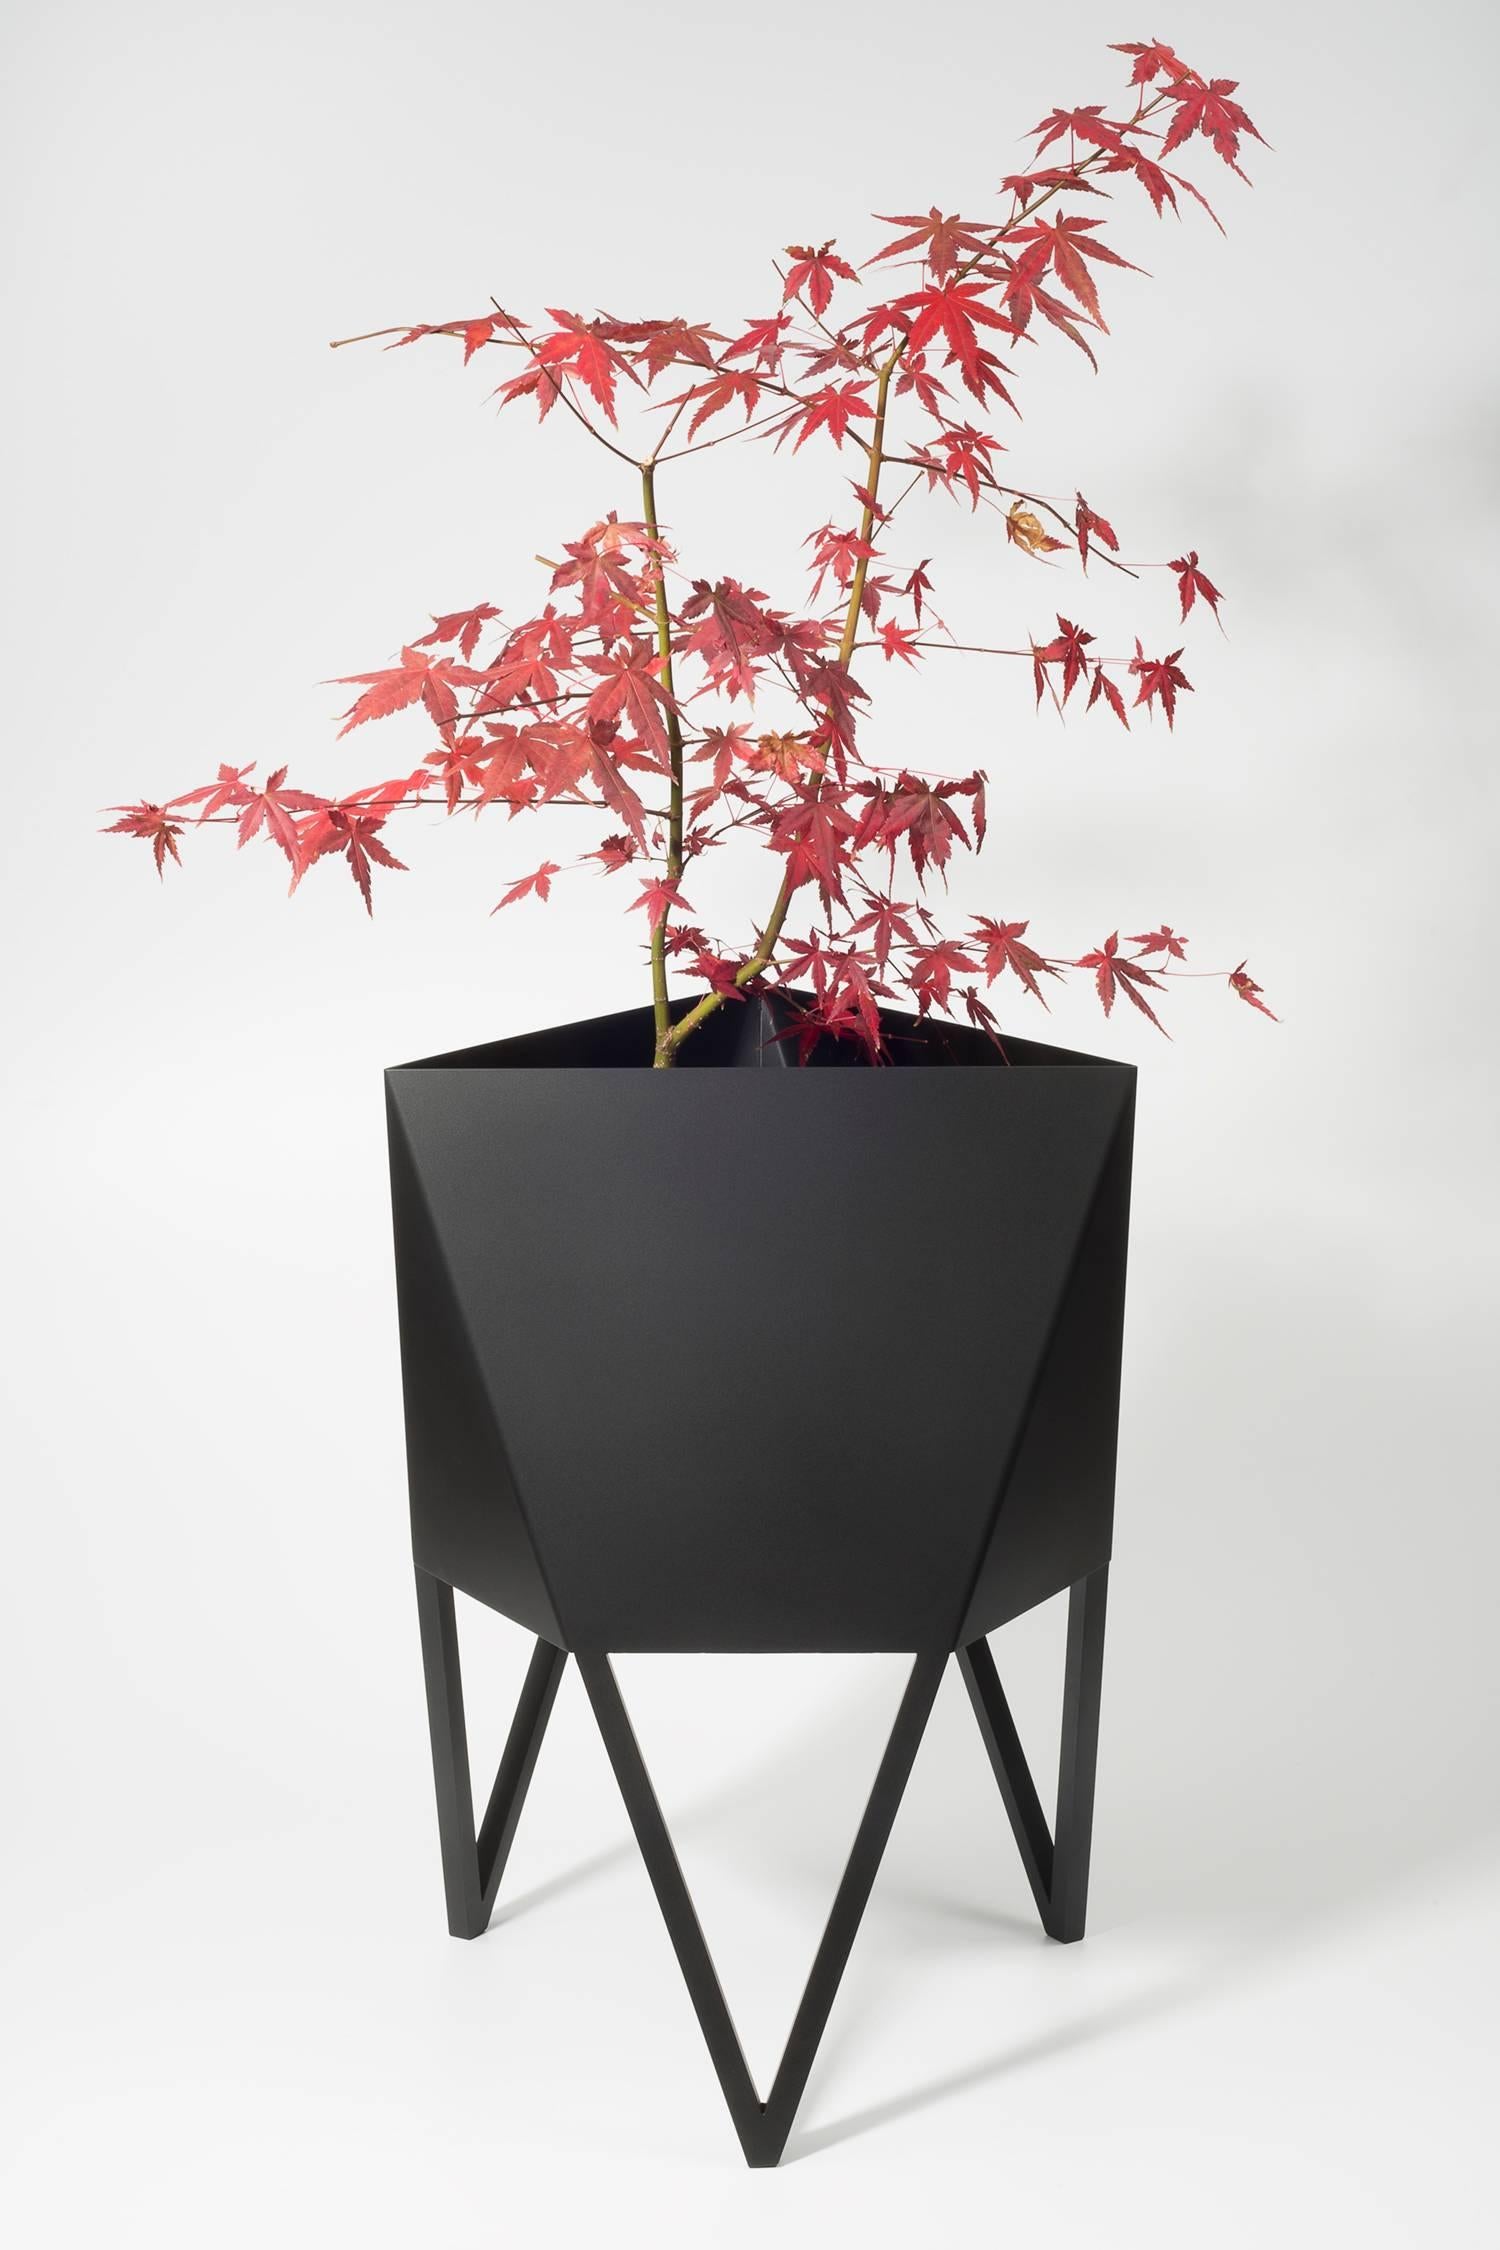 Contemporary Deca Planter in Maroon Steel, Medium, by Force/Collide